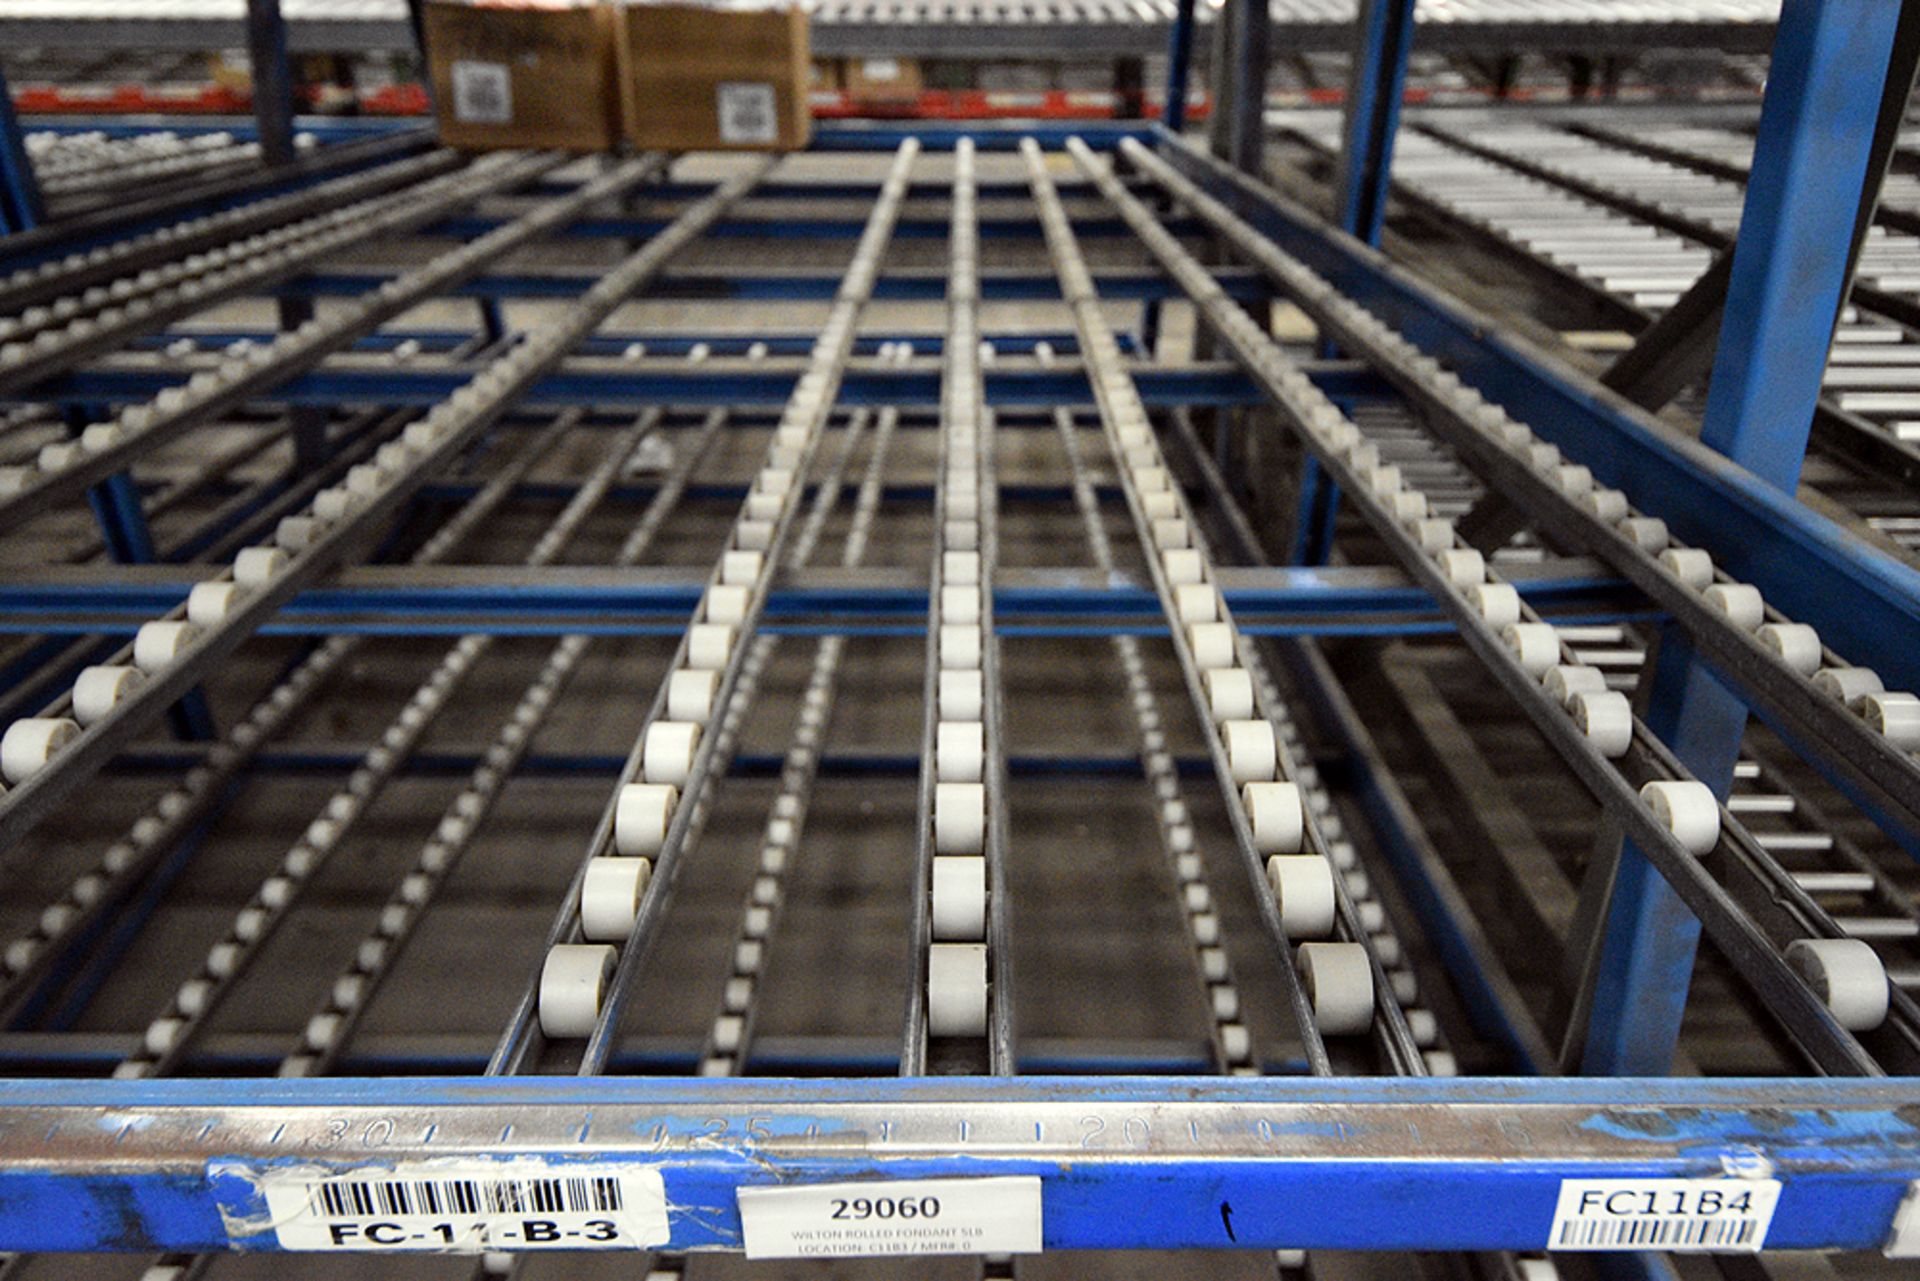 4-Tier Gravity Fed, Carton Flow Rack (124"x249"x95"H) (108"x1" Rollers) - Image 2 of 3